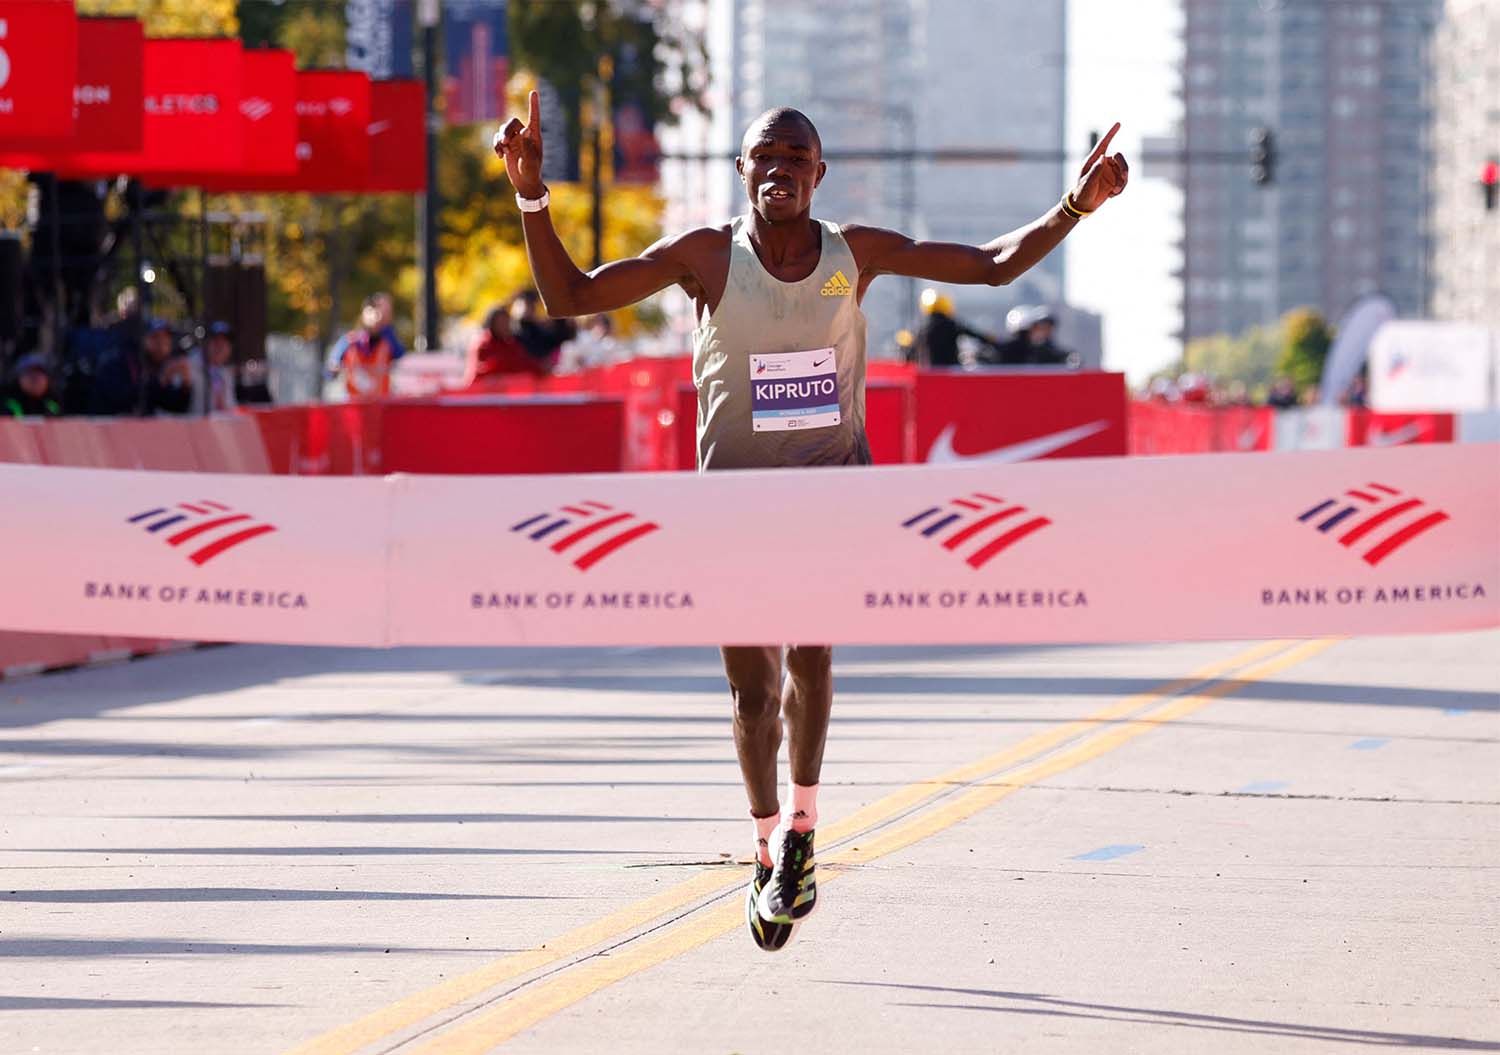 Prestatie Aankondiging kasteel ADIDAS' ADIZERO DOMINANCE CONTINUES AS KIPRUTO STORMS TO VICTORY IN CHICAGO  - Bold Outline : India's leading Online Lifestyle, Fashion & Travel  Magazine.